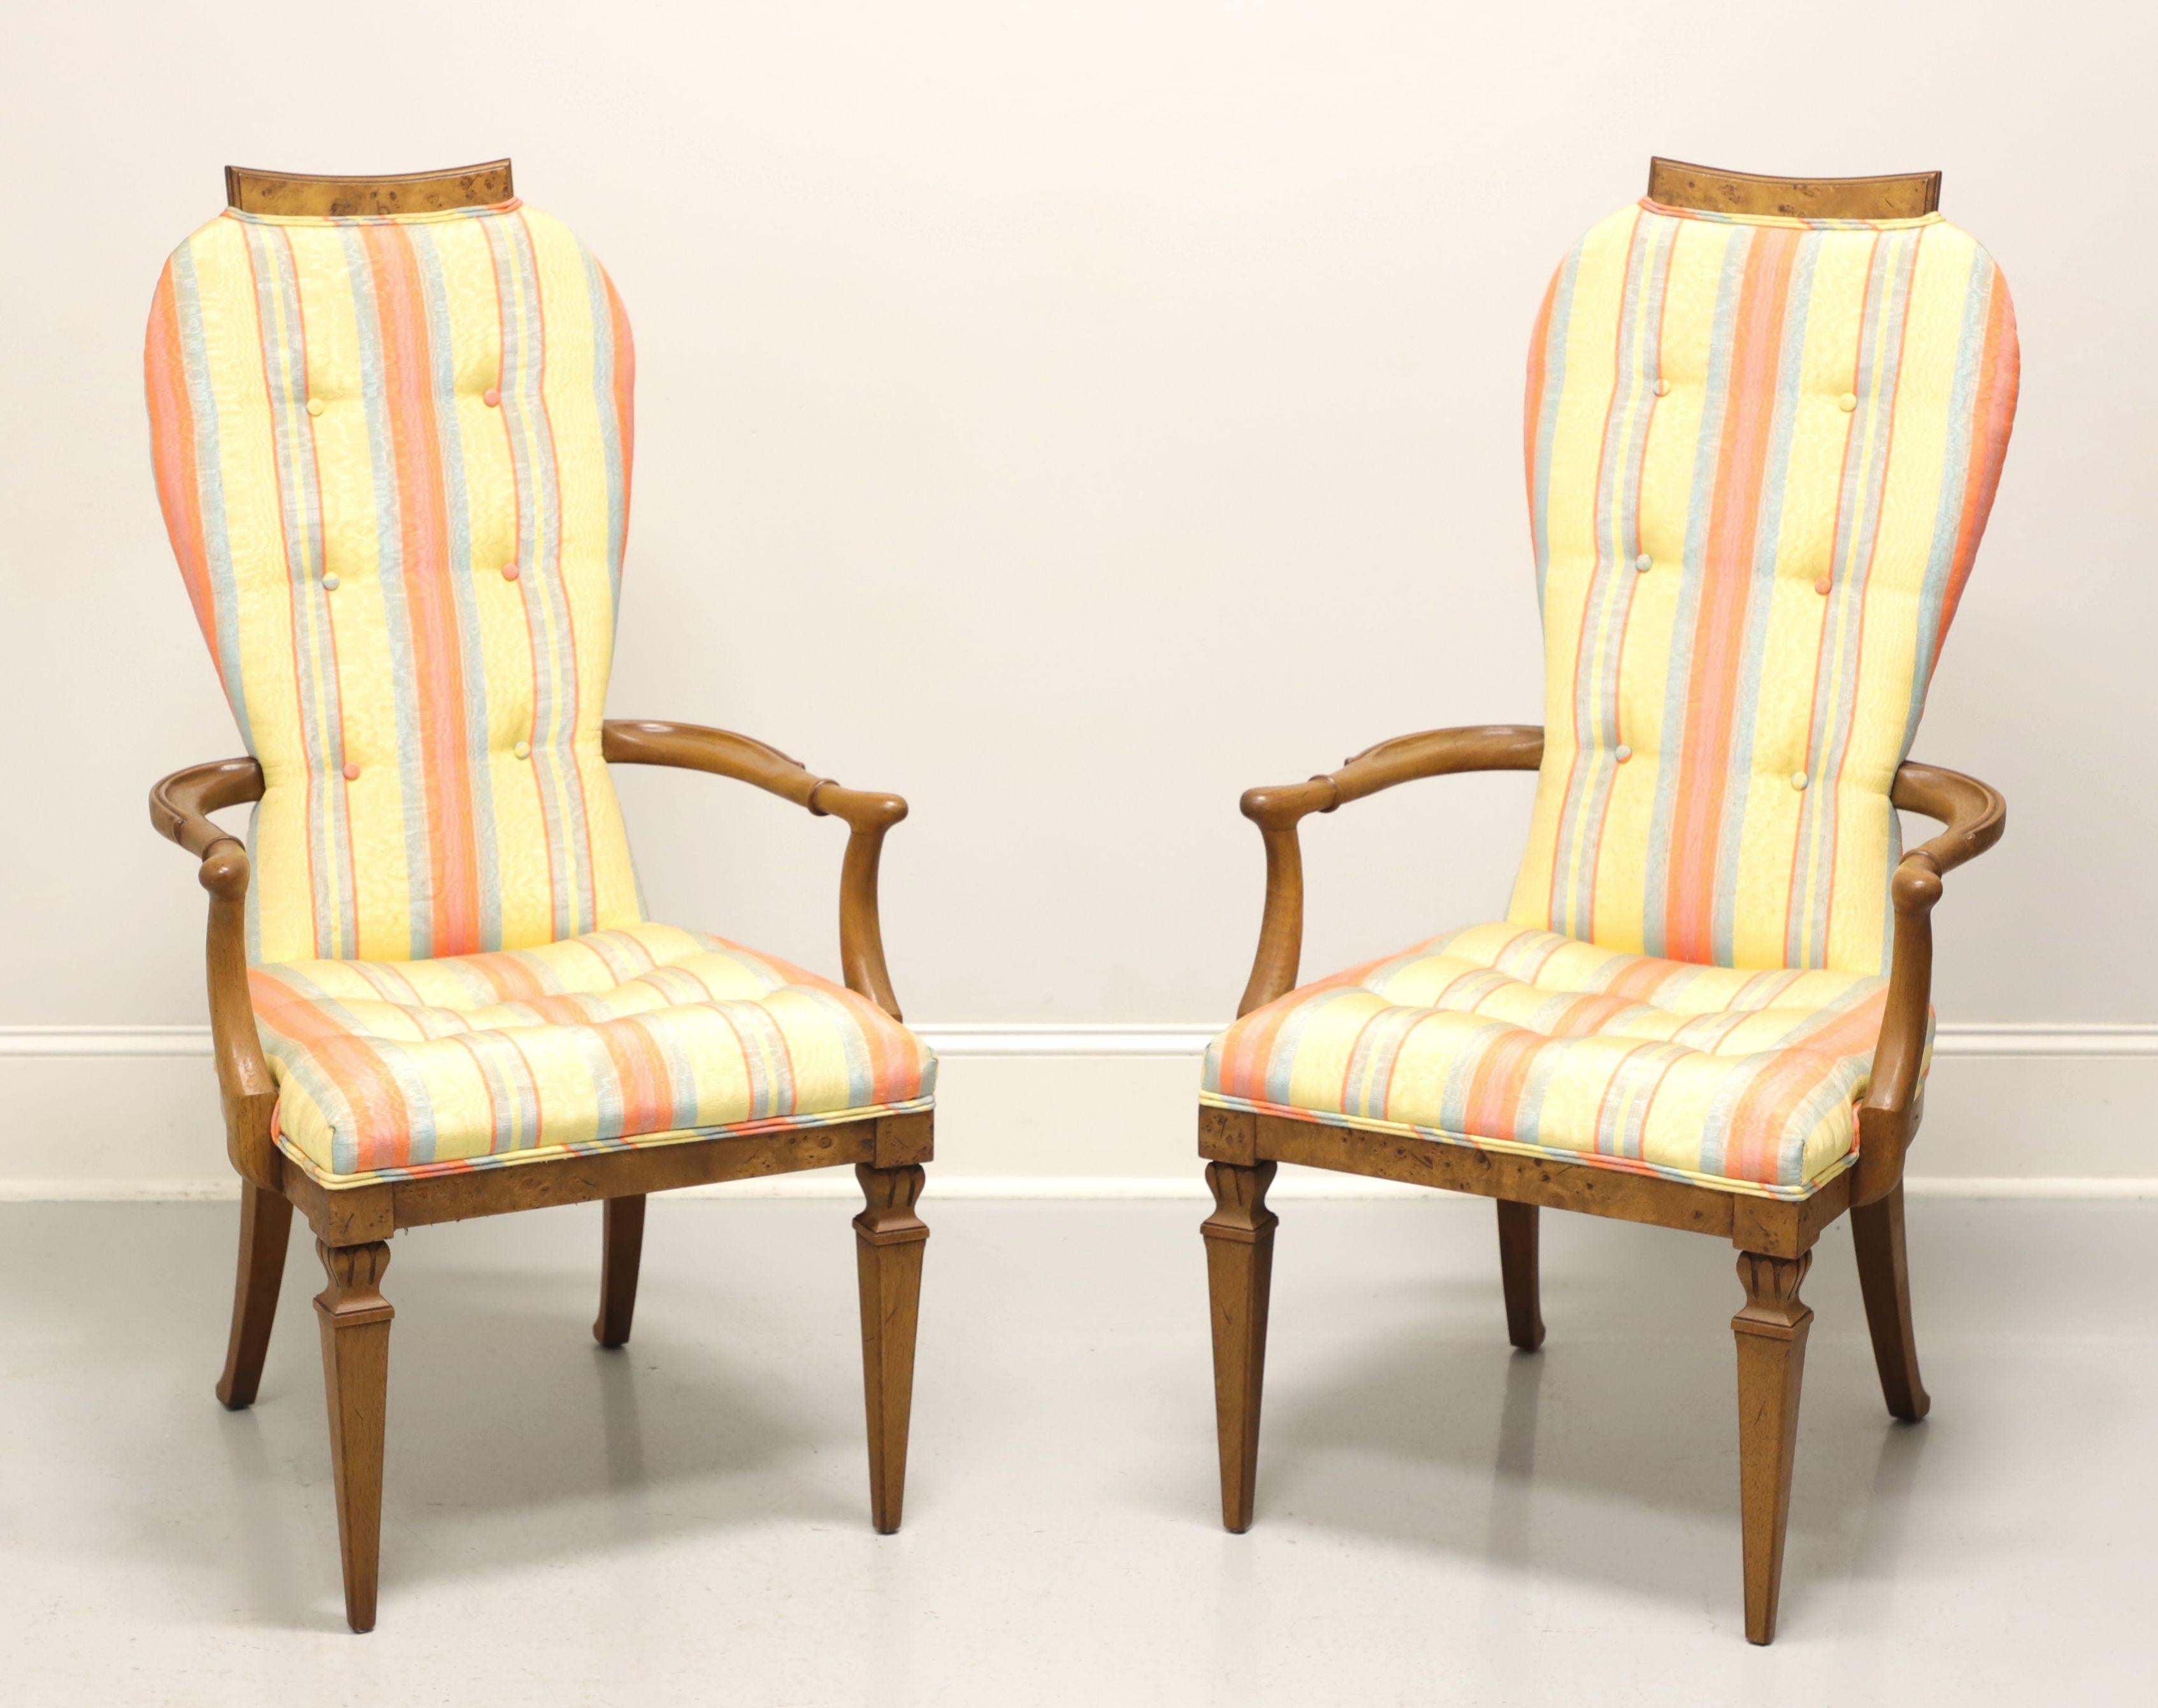 TOMLINSON 1960's Neoclassical Upholstered Dining Armchairs - Pair For Sale 5